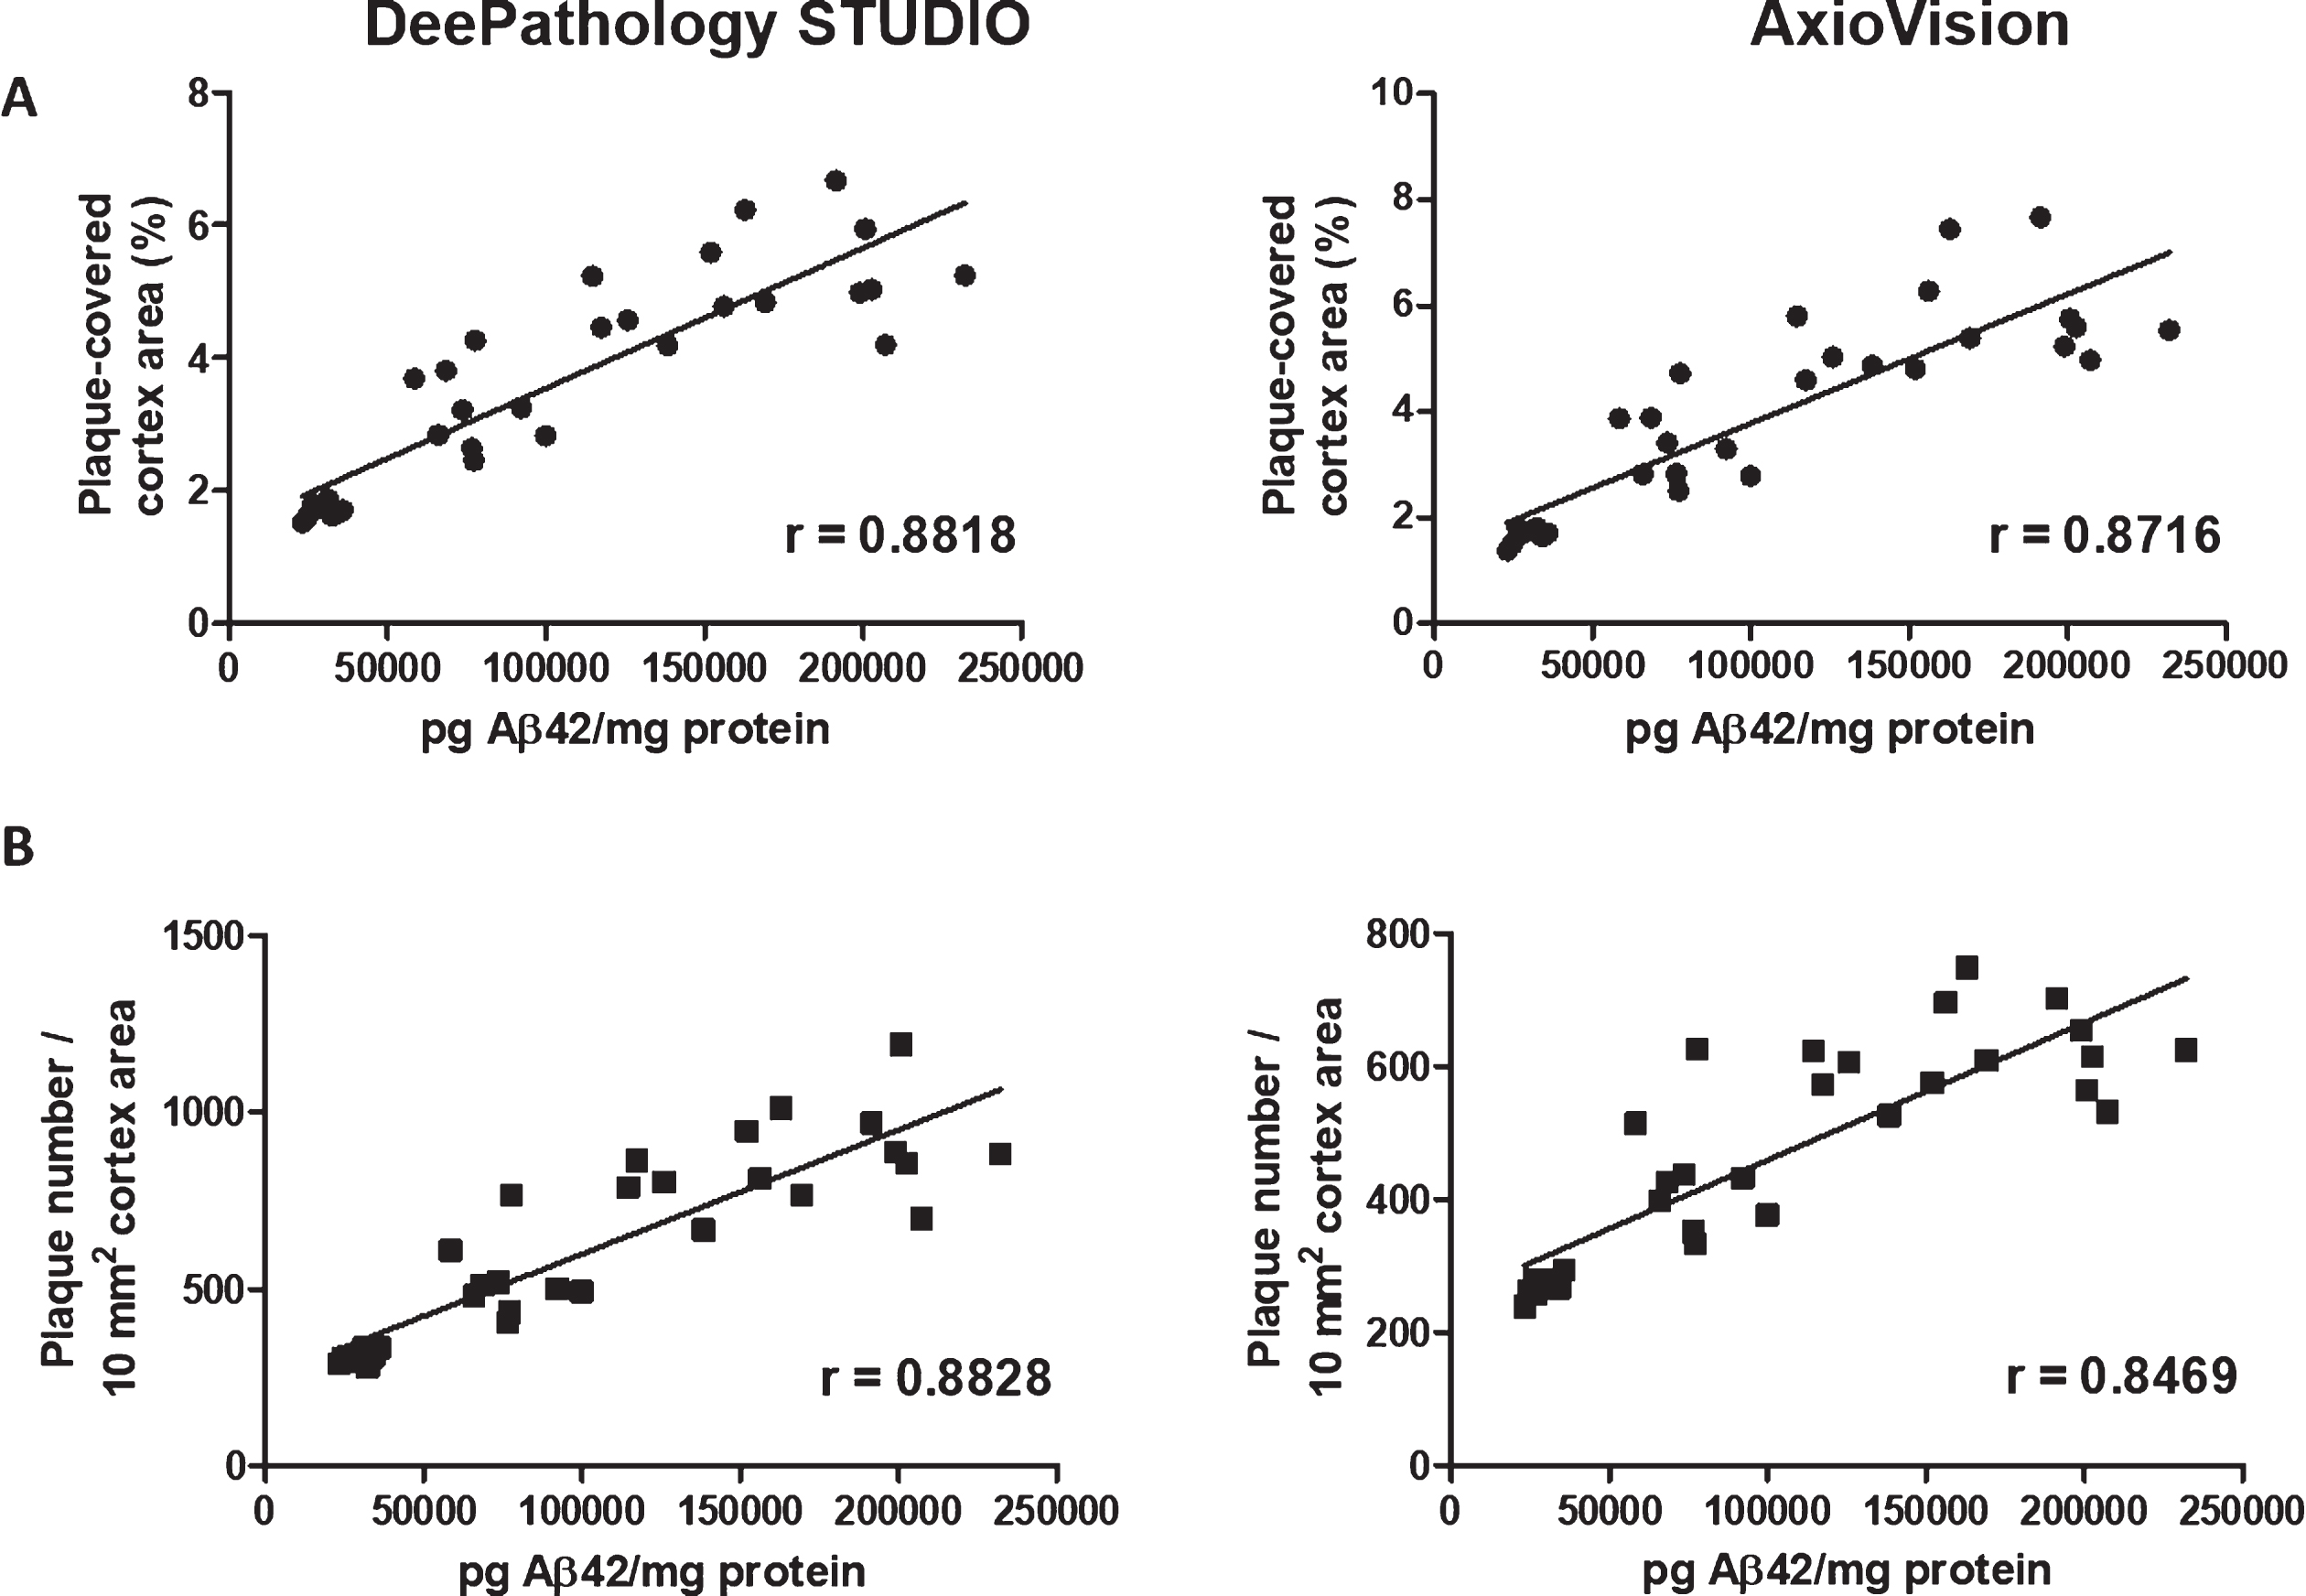 Correlation analysis of Aβ42 concentration measured by (A) ELISA and plaque coverage and (B) plaque density calculated with DeePathology STUDIO (left) and AxioVision (right). Both analyses show similar high correlation to Aβ concentration.